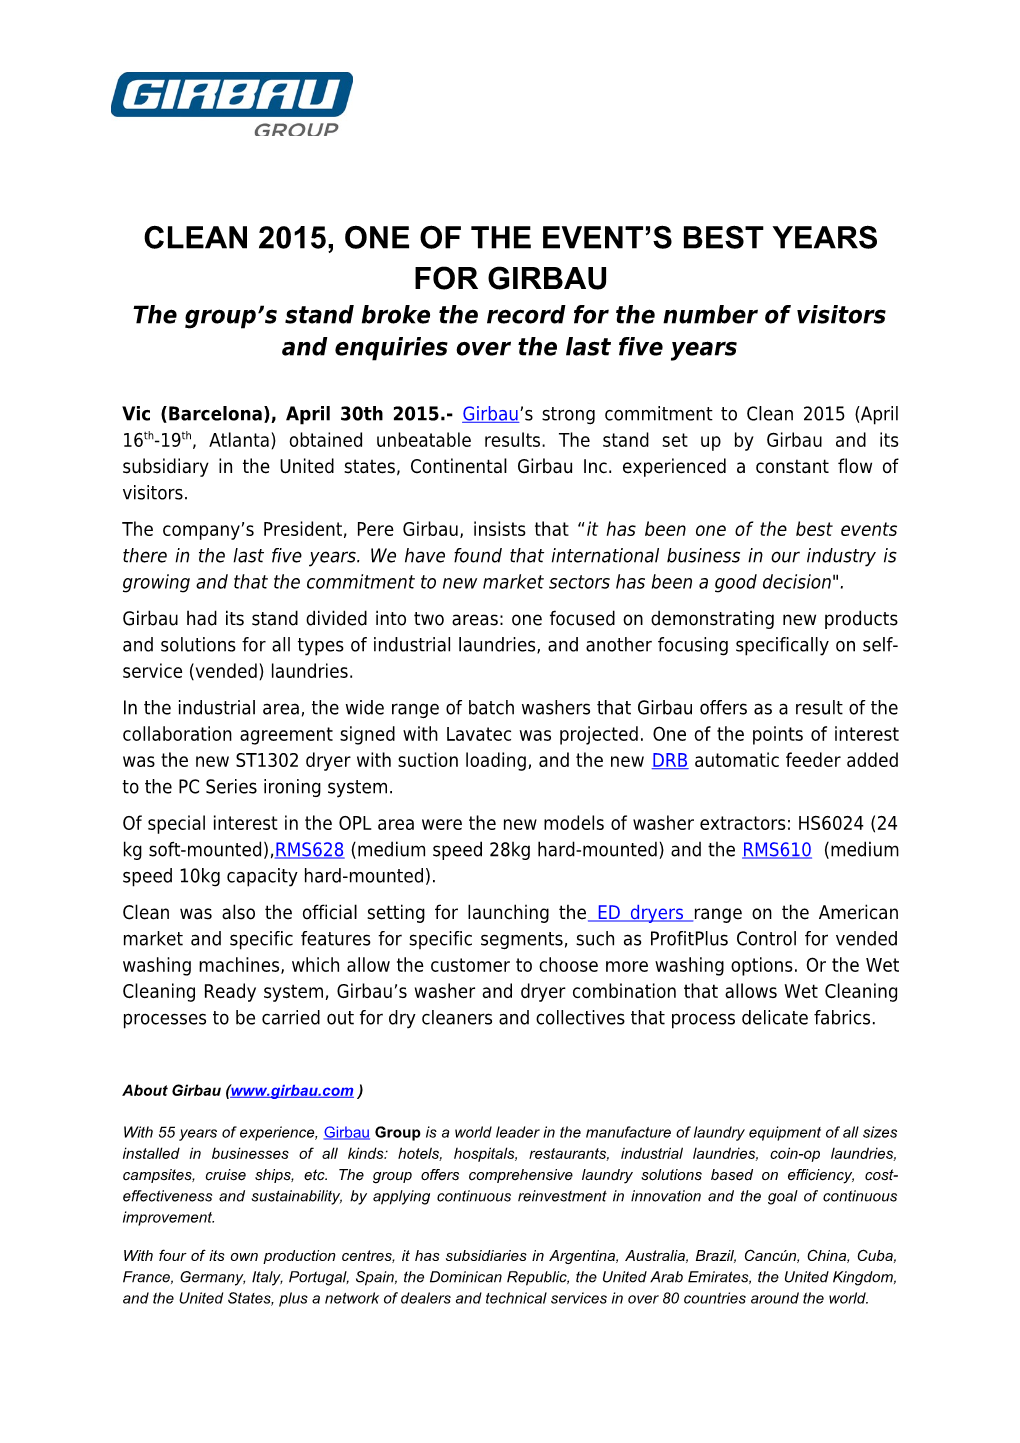 Clean 2015, One of the Best Years for Girbau